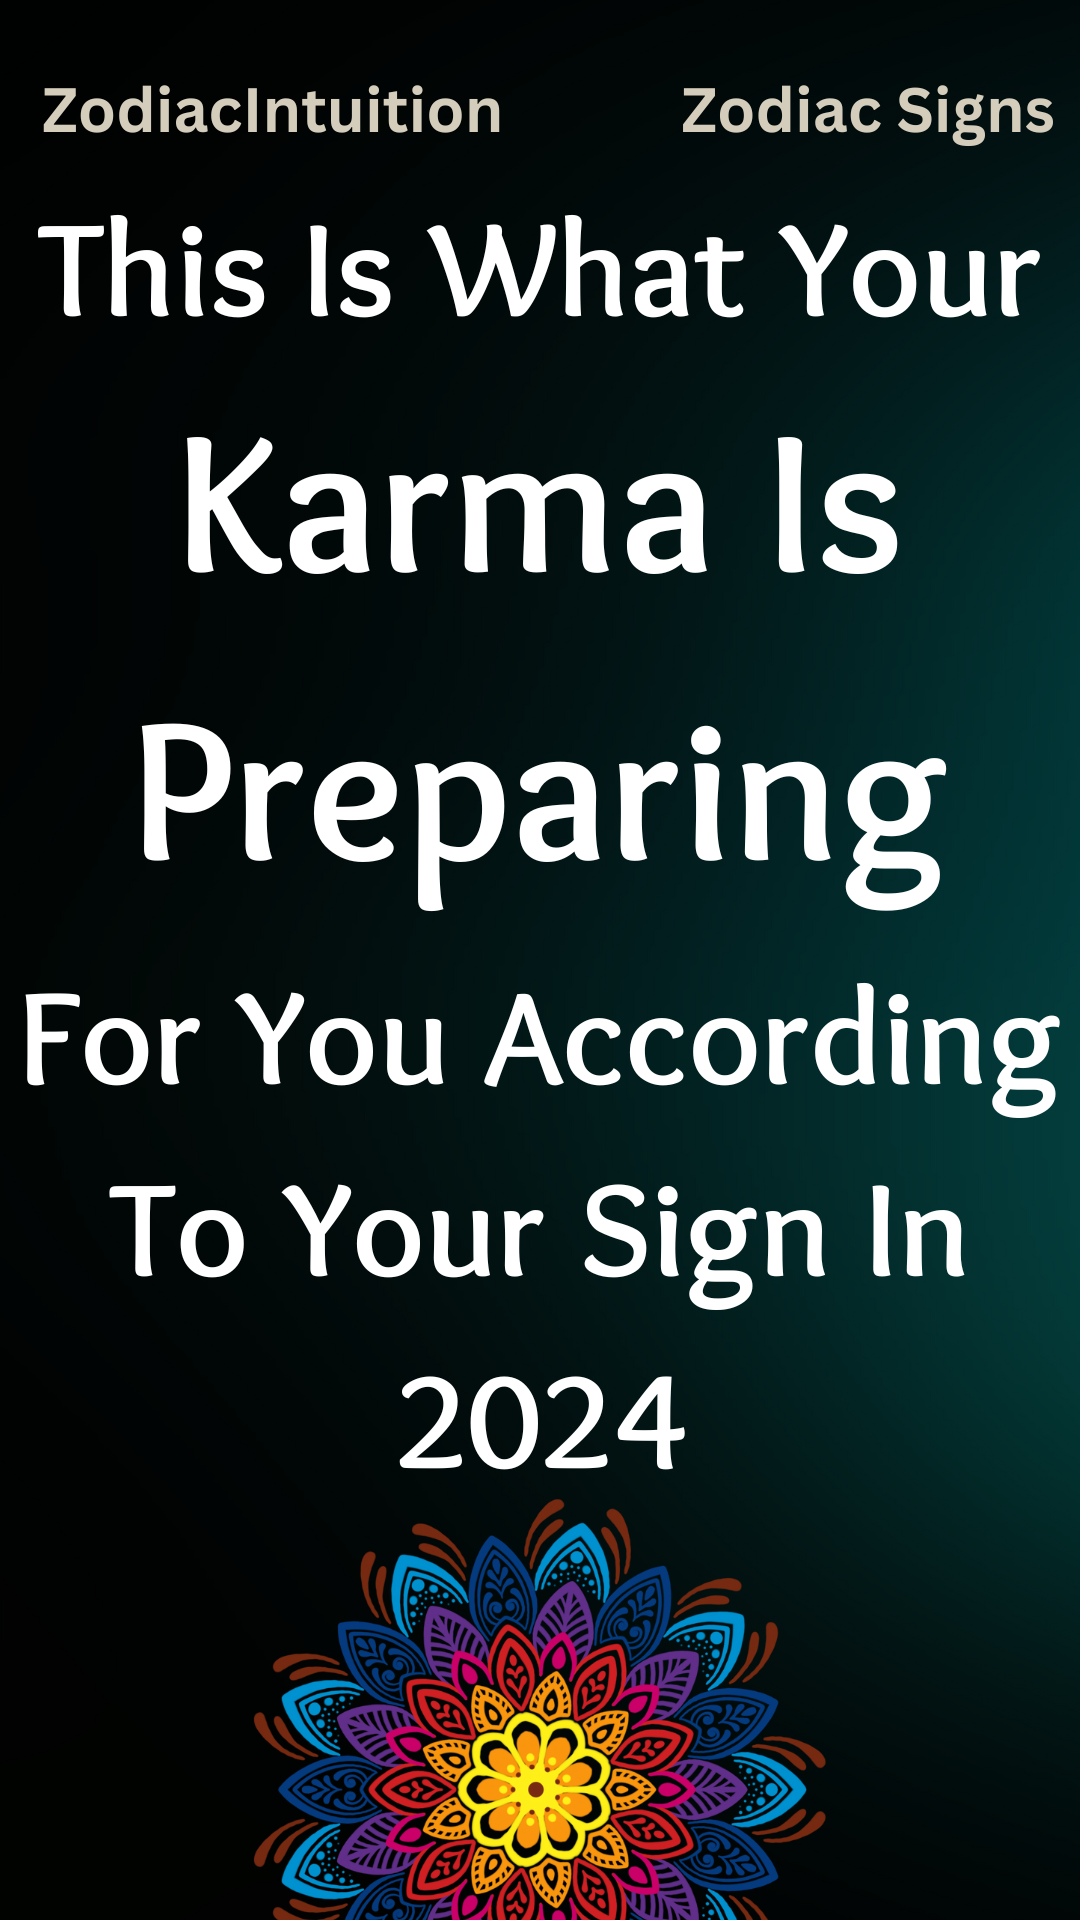 This Is What Your Karma Is Preparing For You According To Your Sign In 2024